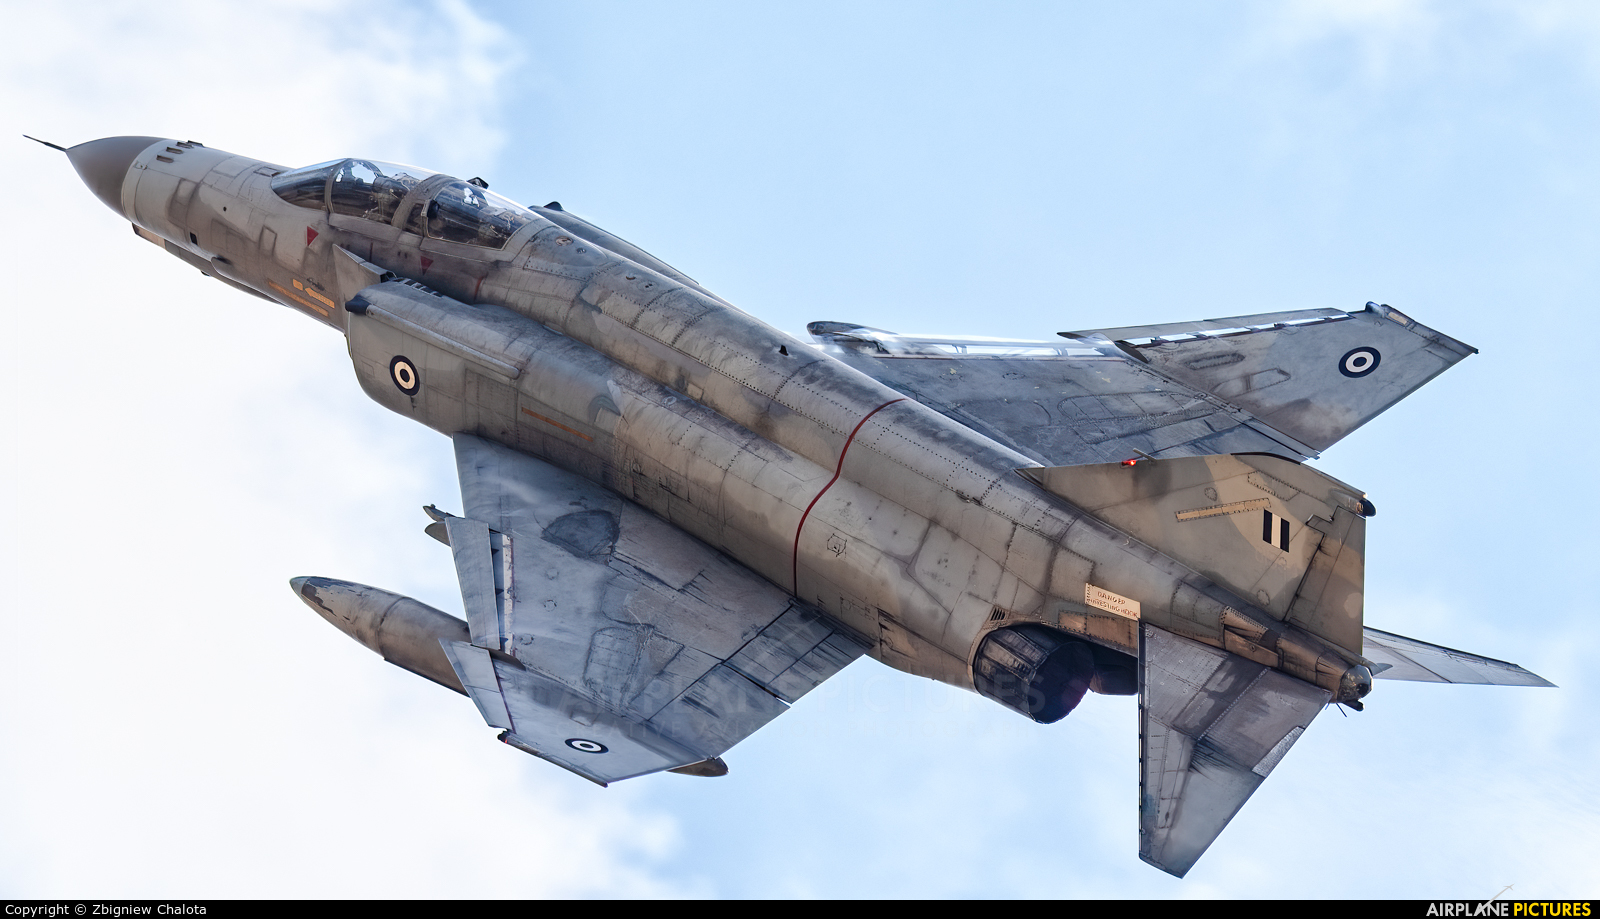 Greece - Hellenic Air Force 01534 aircraft at Tanagra